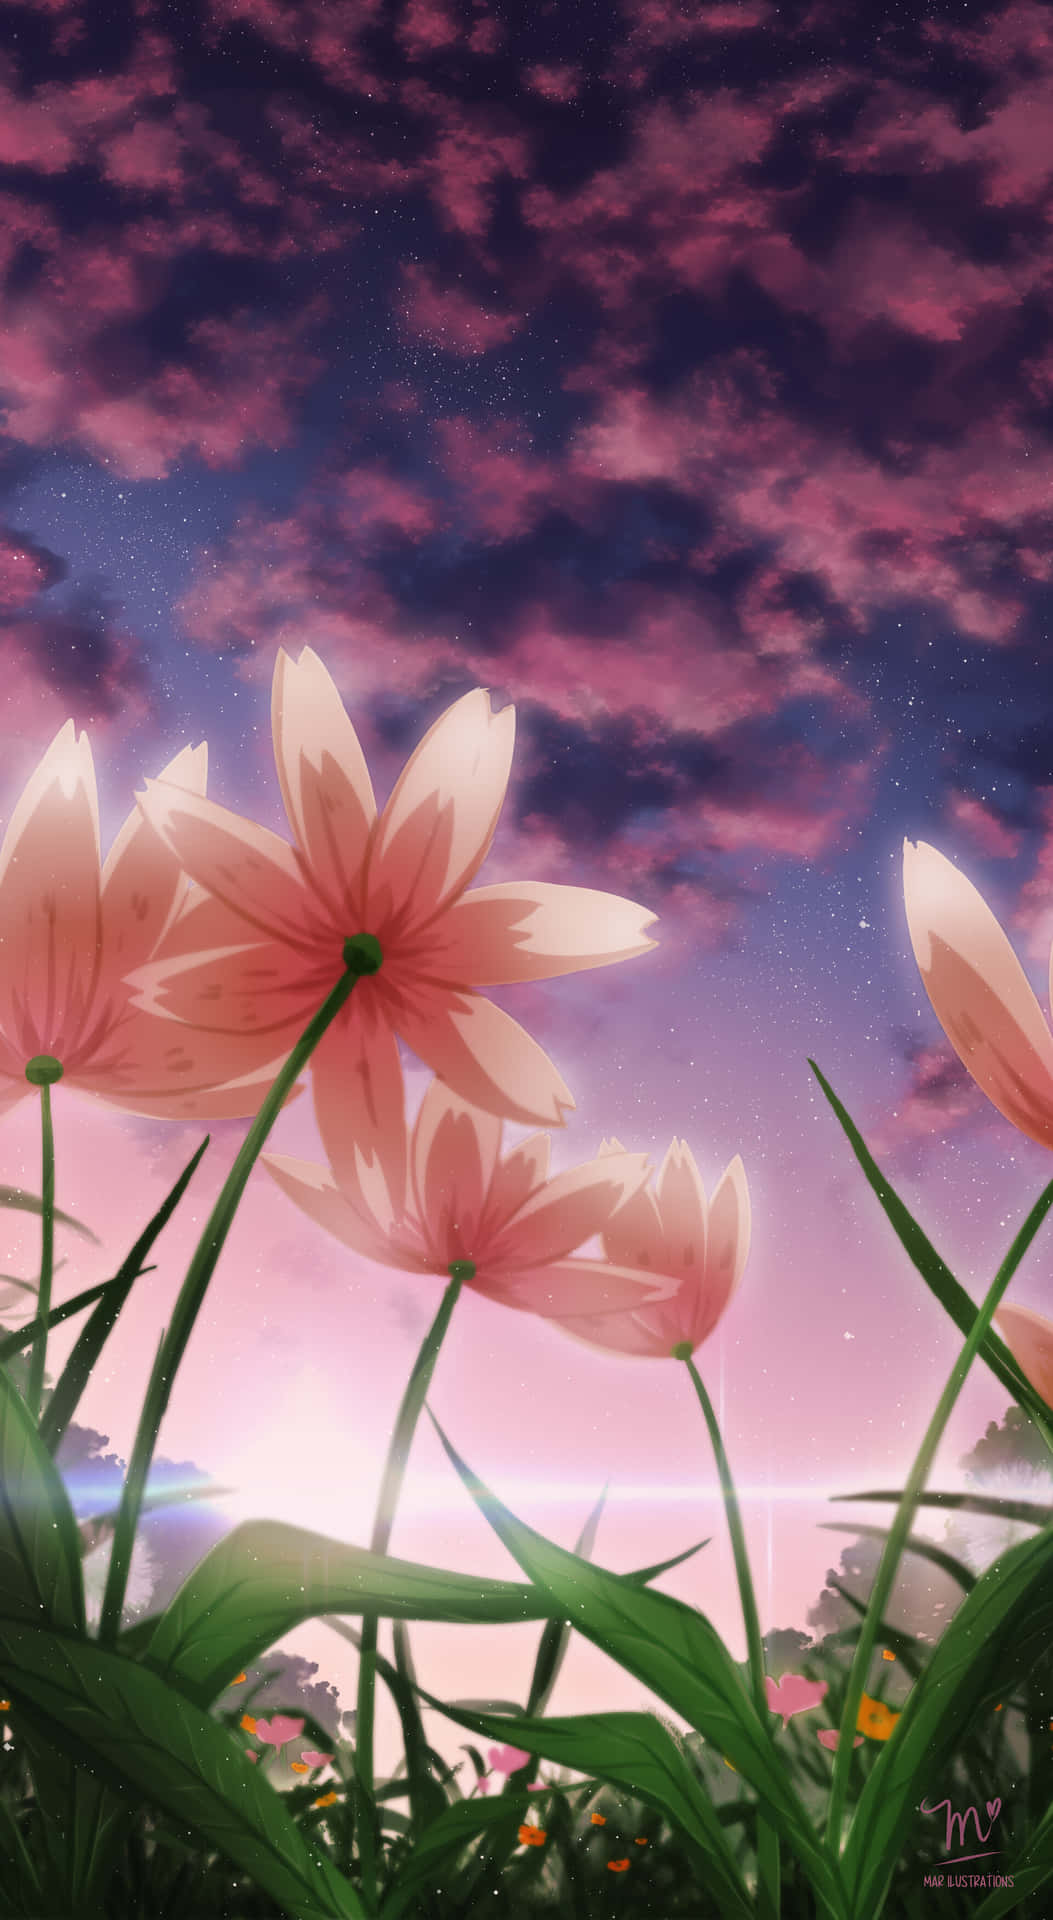 Anime Art Scenery Field of Flowers With Puffy Clouds - Etsy Australia-demhanvico.com.vn